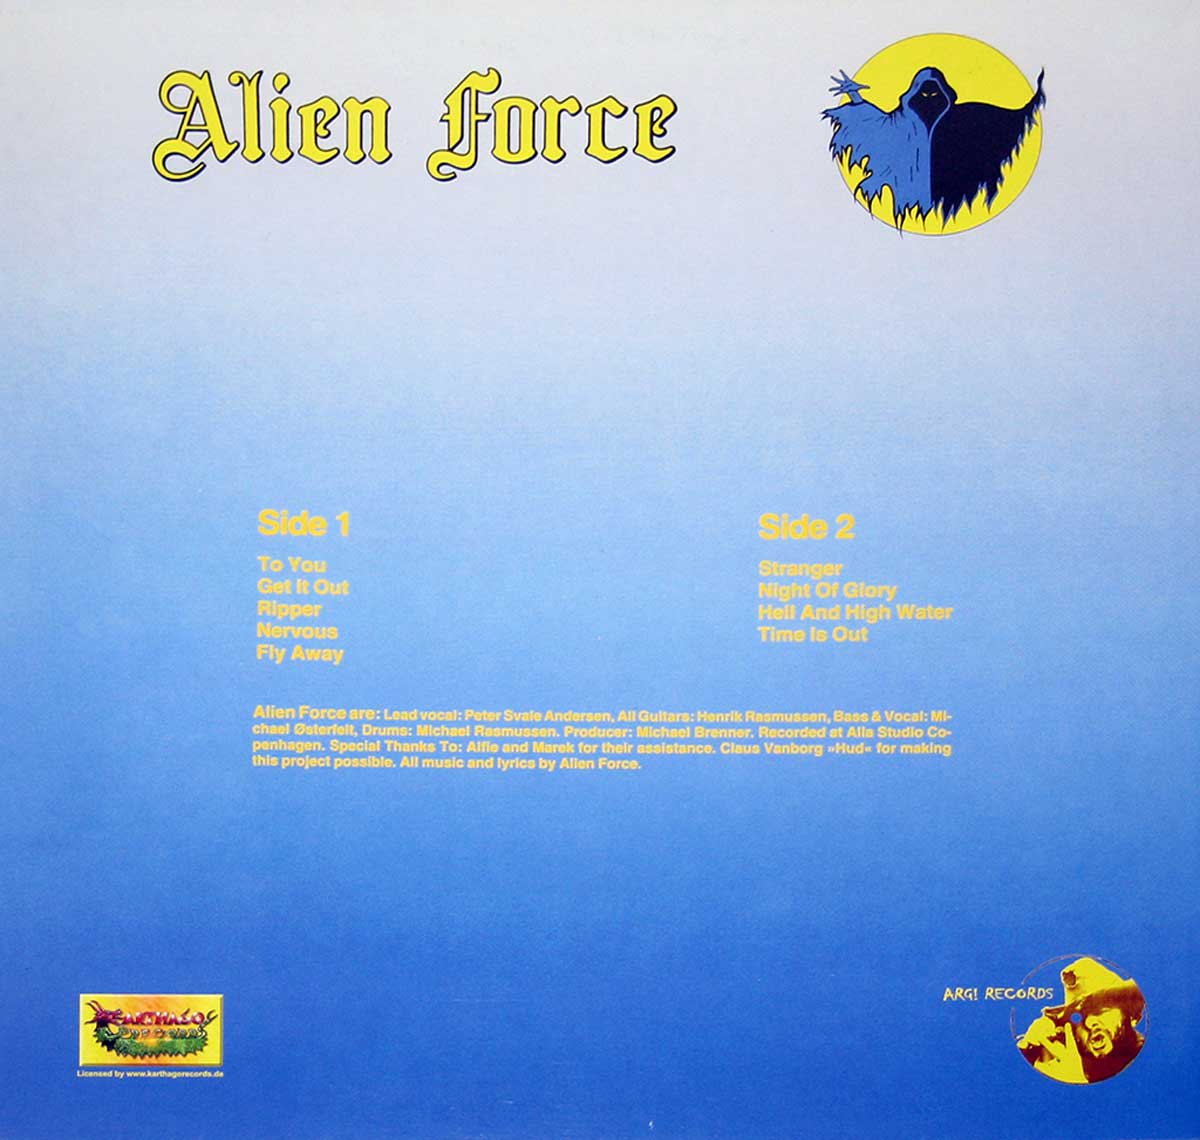 High Resolution Photo Album Back Cover of Alien Force - Hell and High Water https://vinyl-records.nl